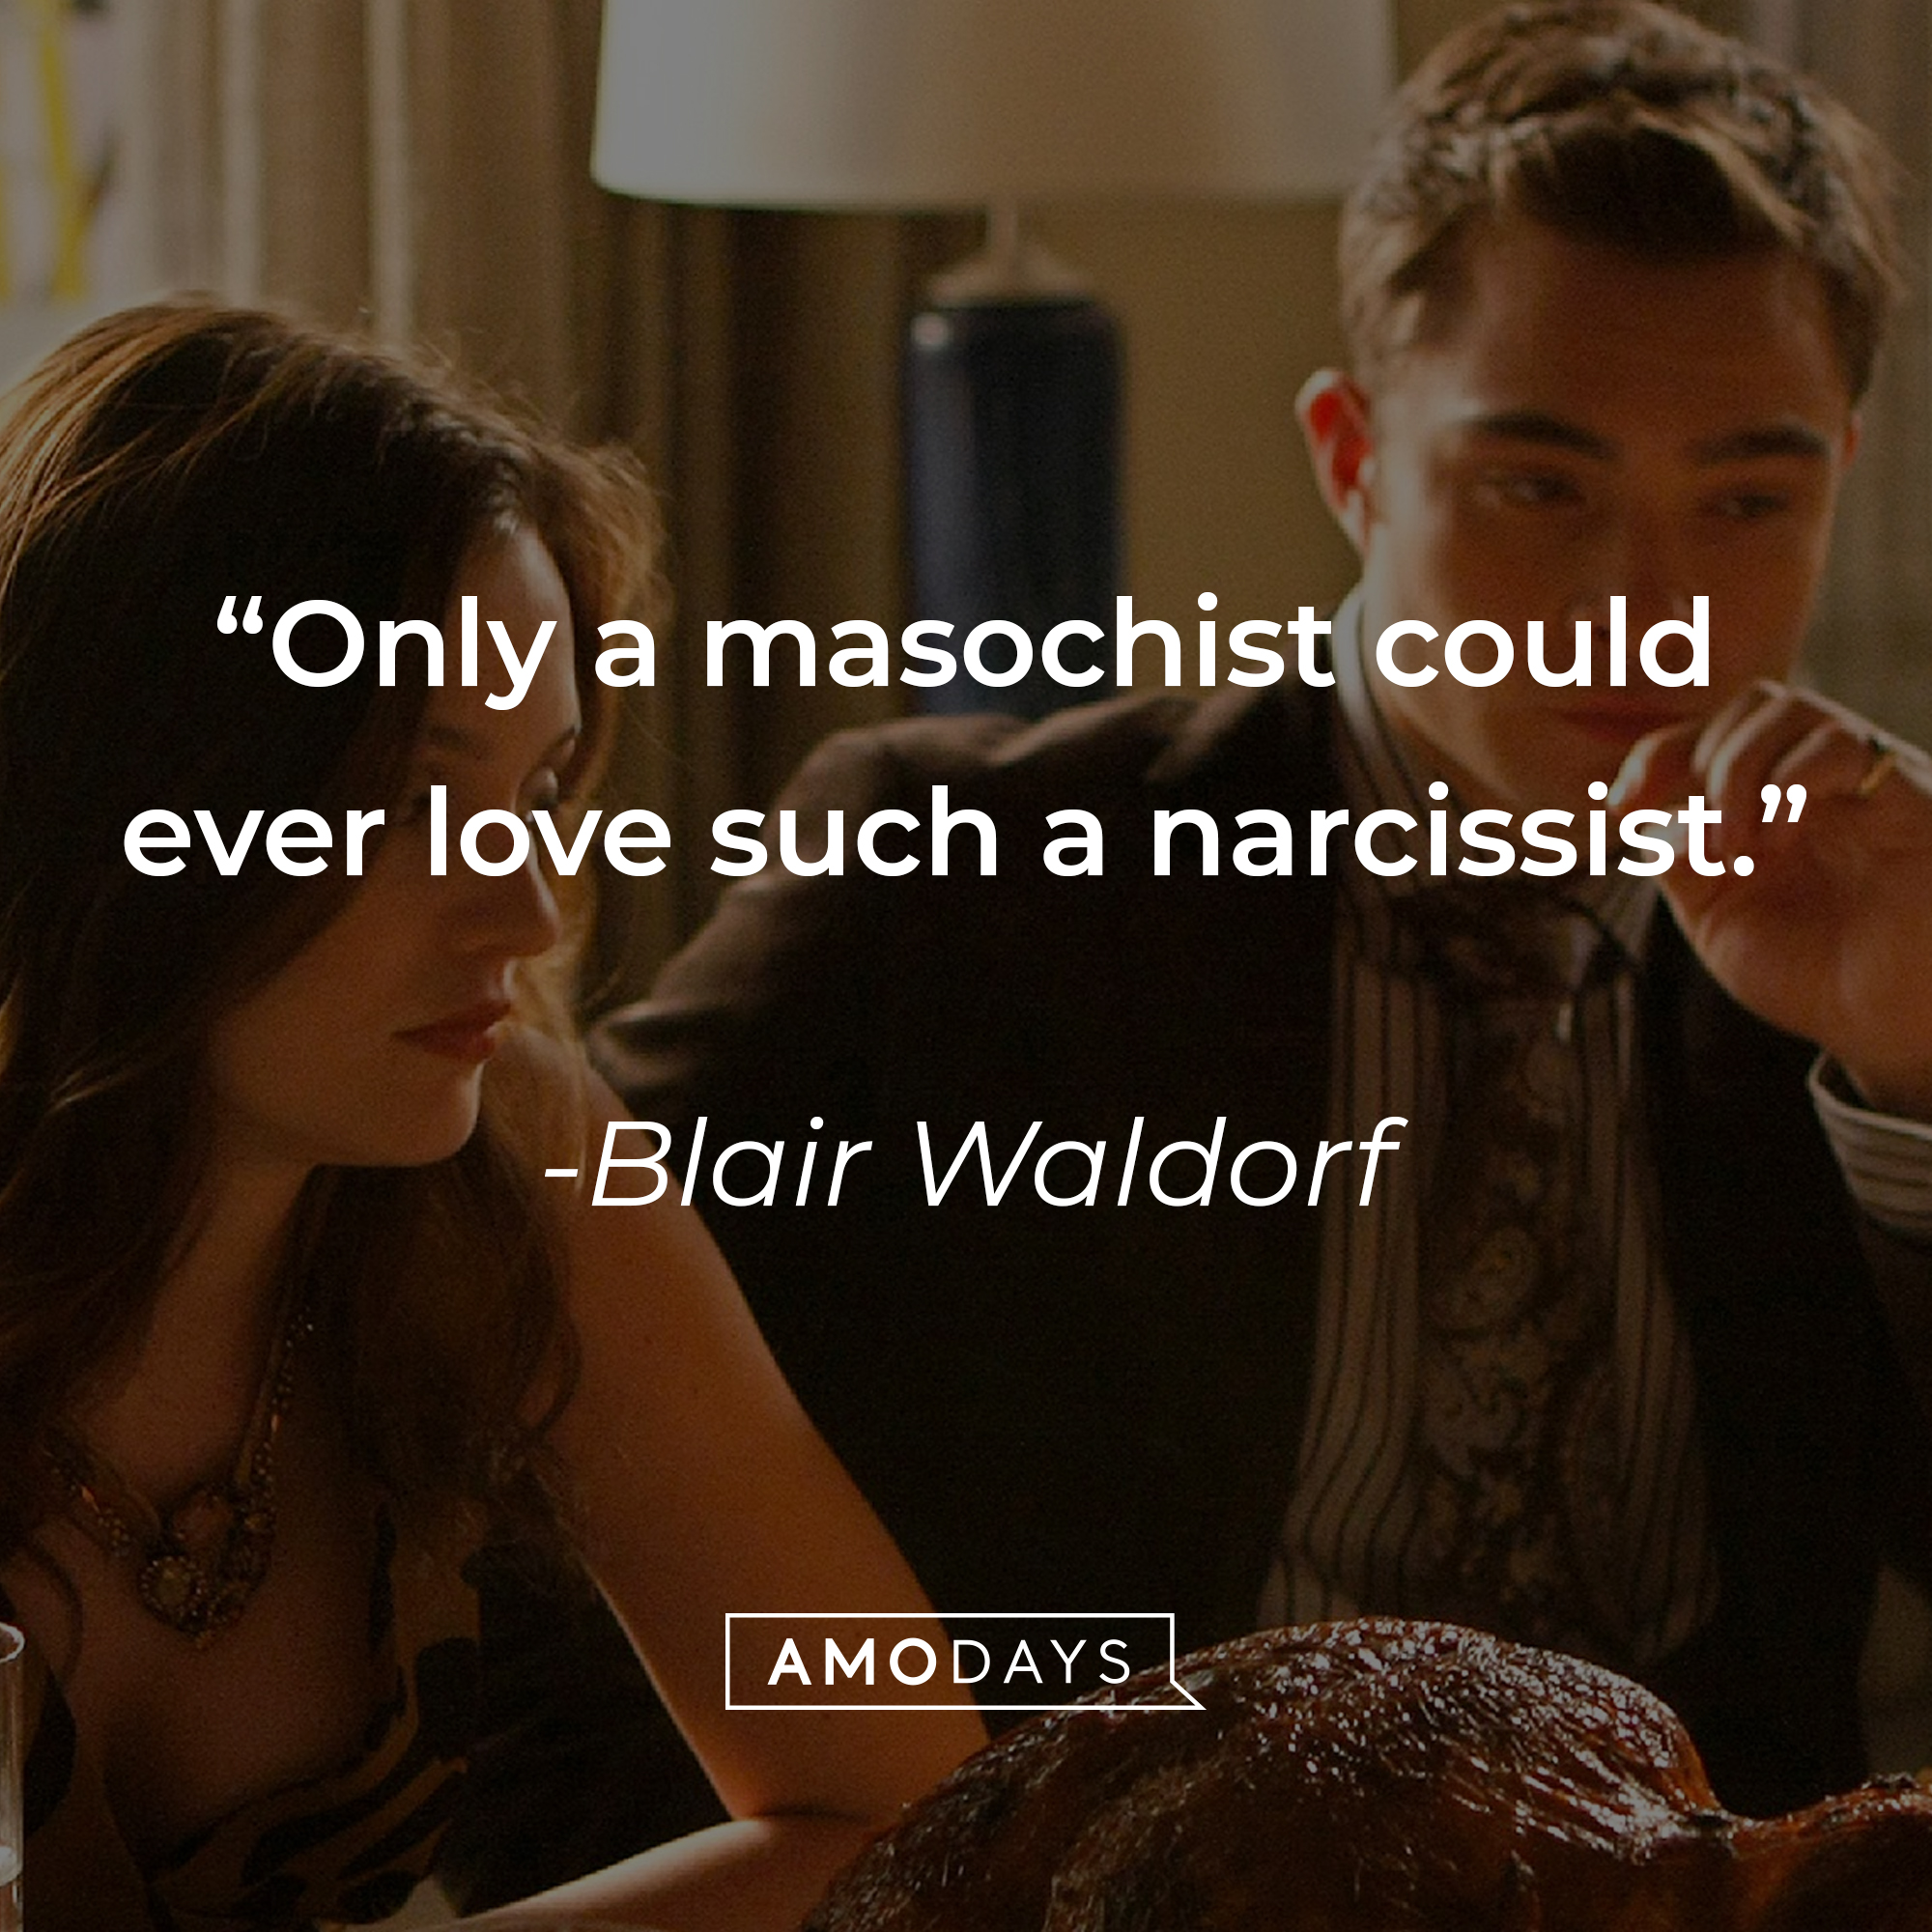 Image from "Gossip Girl" with Blair Waldrof's quote: "Only a masochist could ever love such a narcissist." | Source: facebook.com/GossipGirl